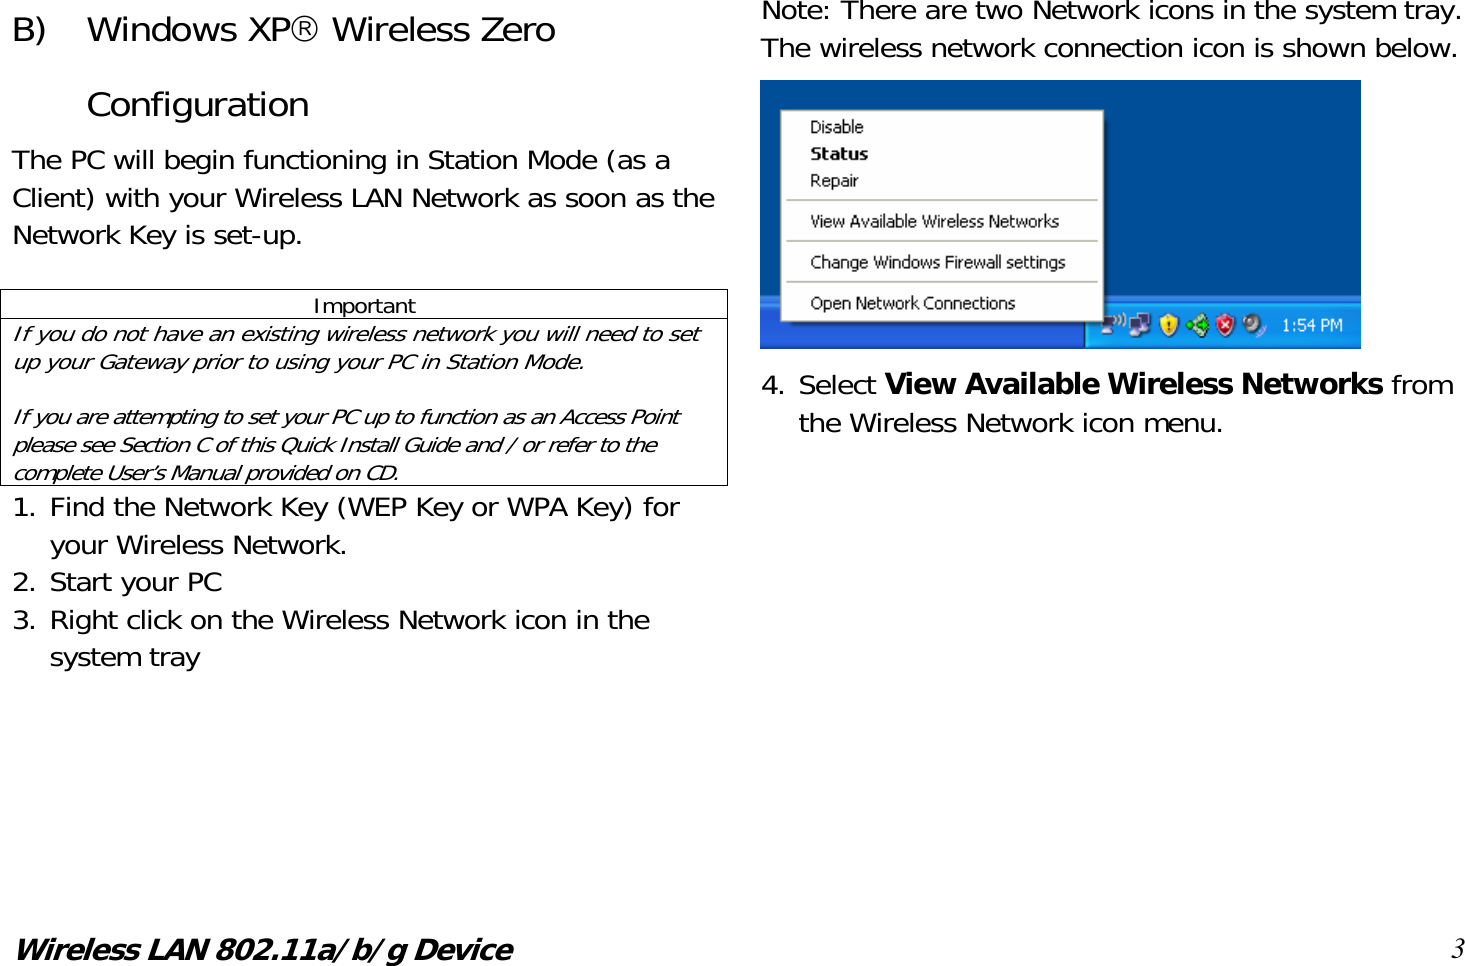 Wireless LAN 802.11a/b/g Device 3 B) Windows XP Wireless Zero Configuration The PC will begin functioning in Station Mode (as a Client) with your Wireless LAN Network as soon as the Network Key is set-up.  Important If you do not have an existing wireless network you will need to set up your Gateway prior to using your PC in Station Mode.  If you are attempting to set your PC up to function as an Access Point please see Section C of this Quick Install Guide and / or refer to the complete User’s Manual provided on CD. 1. Find the Network Key (WEP Key or WPA Key) for your Wireless Network. 2. Start your PC 3. Right click on the Wireless Network icon in the system tray    Note: There are two Network icons in the system tray. The wireless network connection icon is shown below.  4. Select View Available Wireless Networks from the Wireless Network icon menu.            